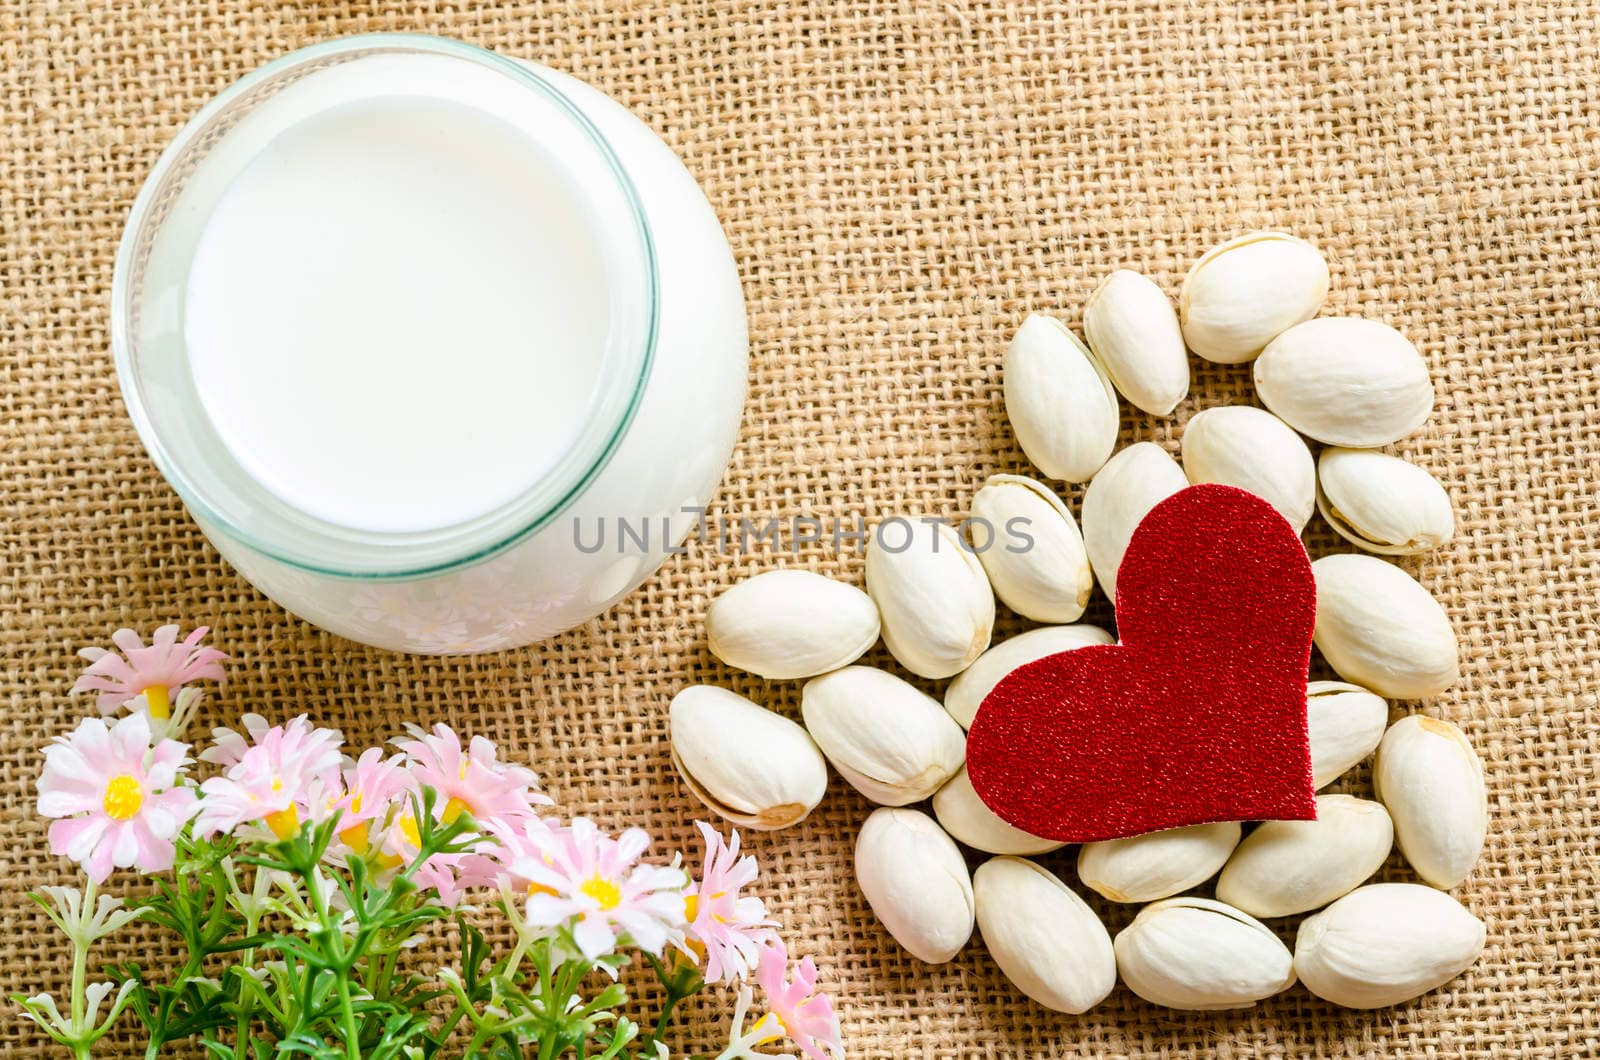 Pistachio nuts and milk in glass with flower on sack background.